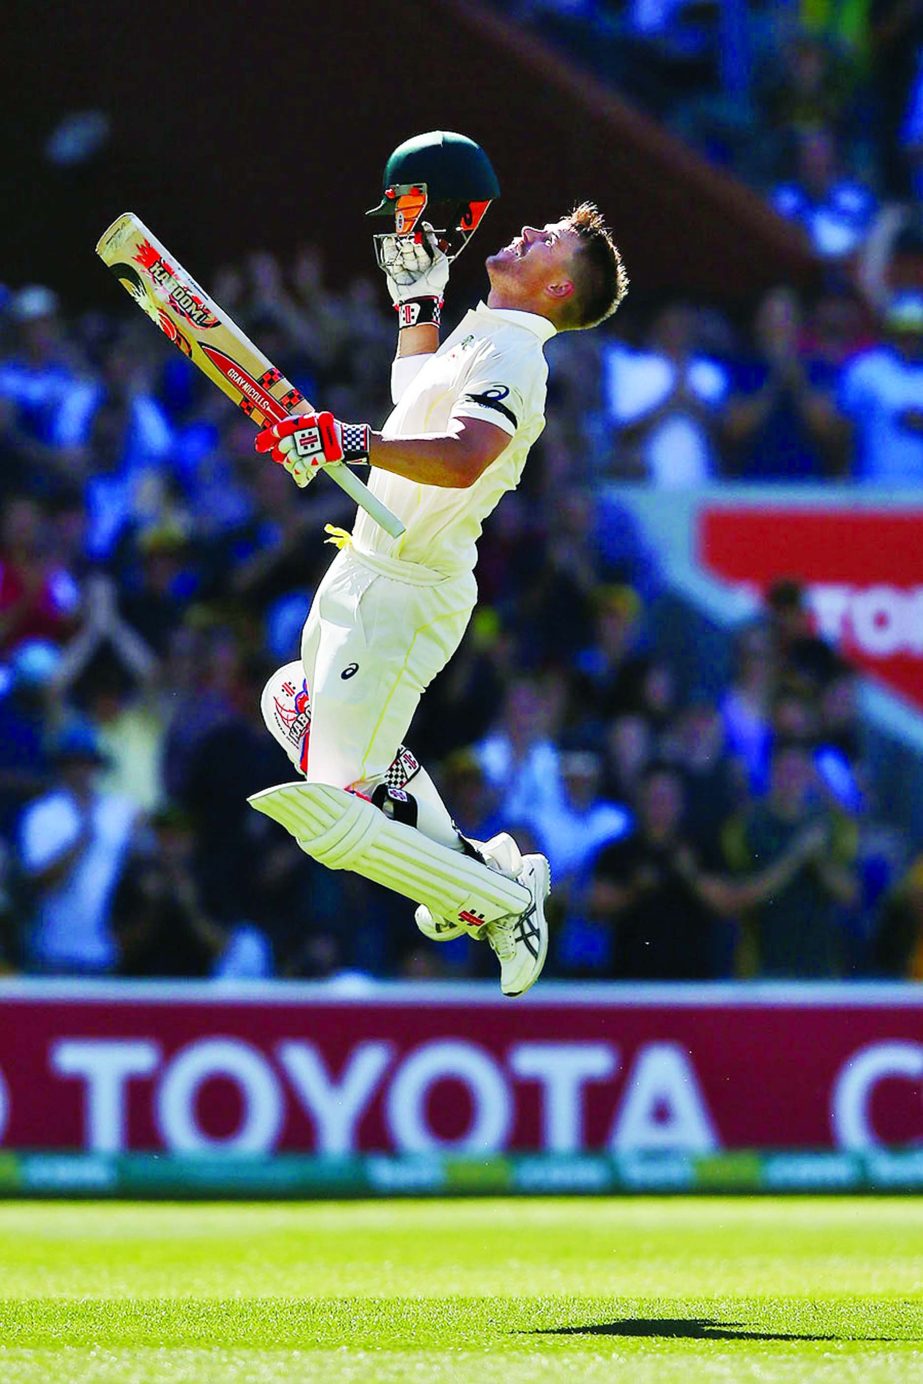 David Warner breaks into his trademark leaping celebration after reaching his hundred on the 4th day of 1st Test between Australia and India at Adelaide on Friday.